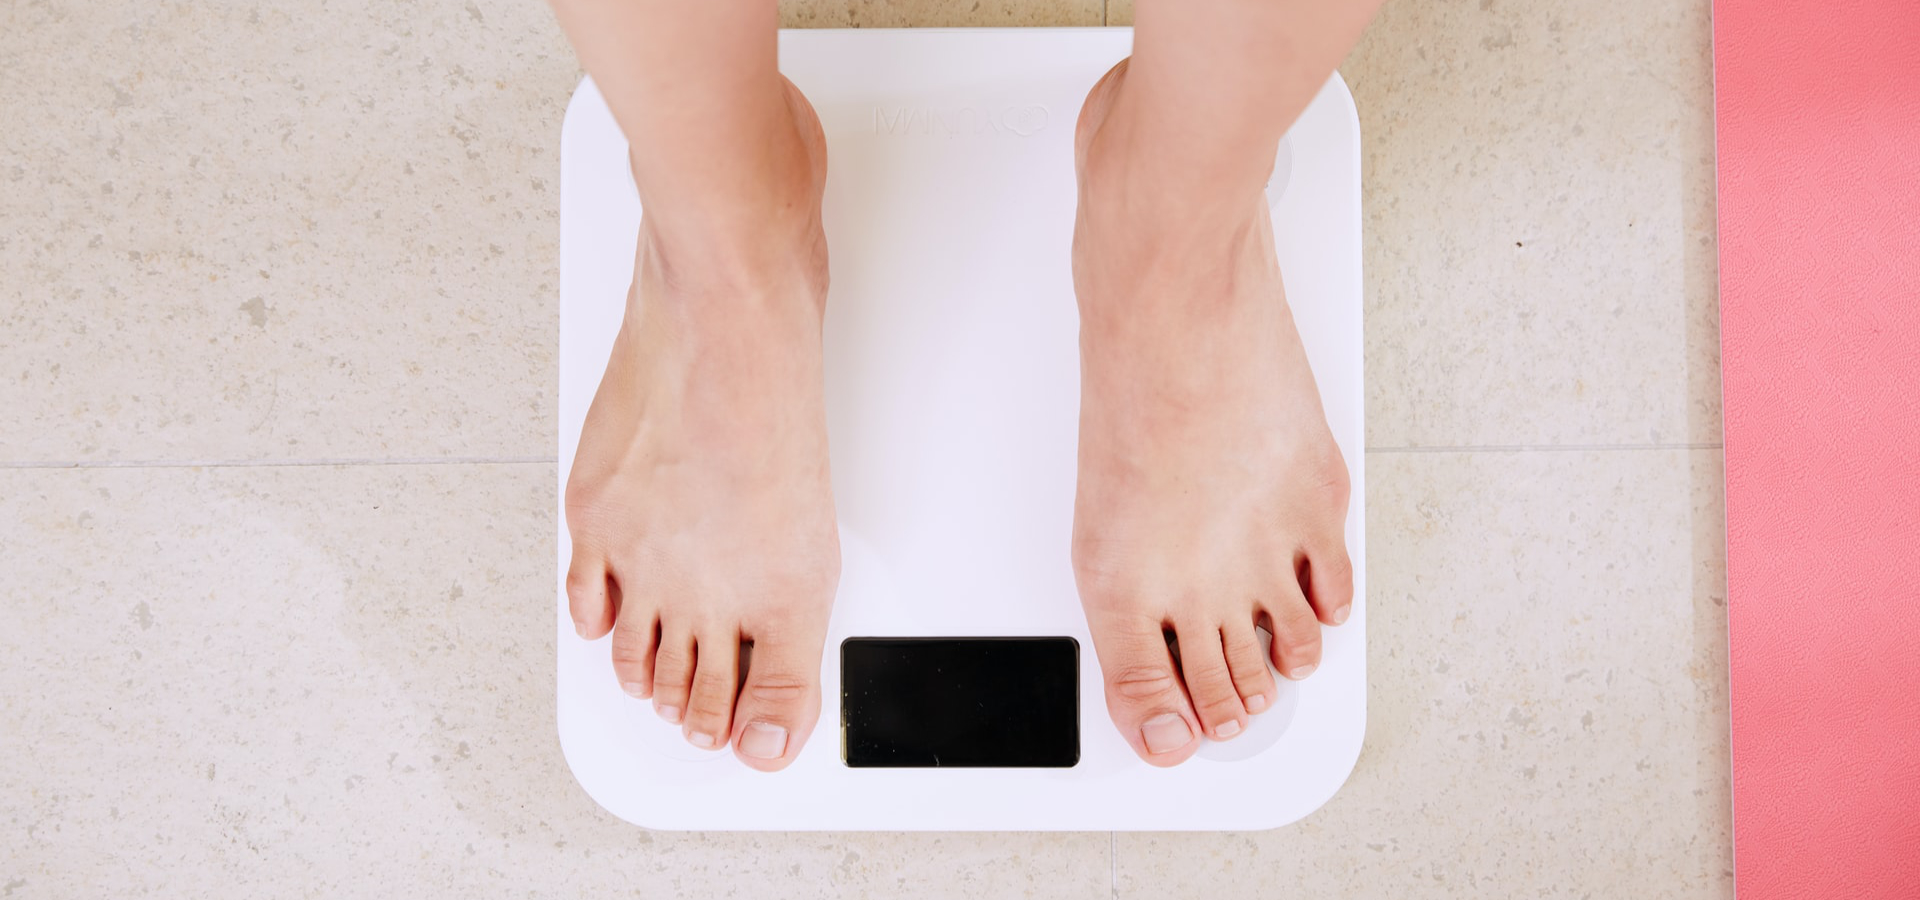 Study assessed knowledge about obesity of the Portuguese